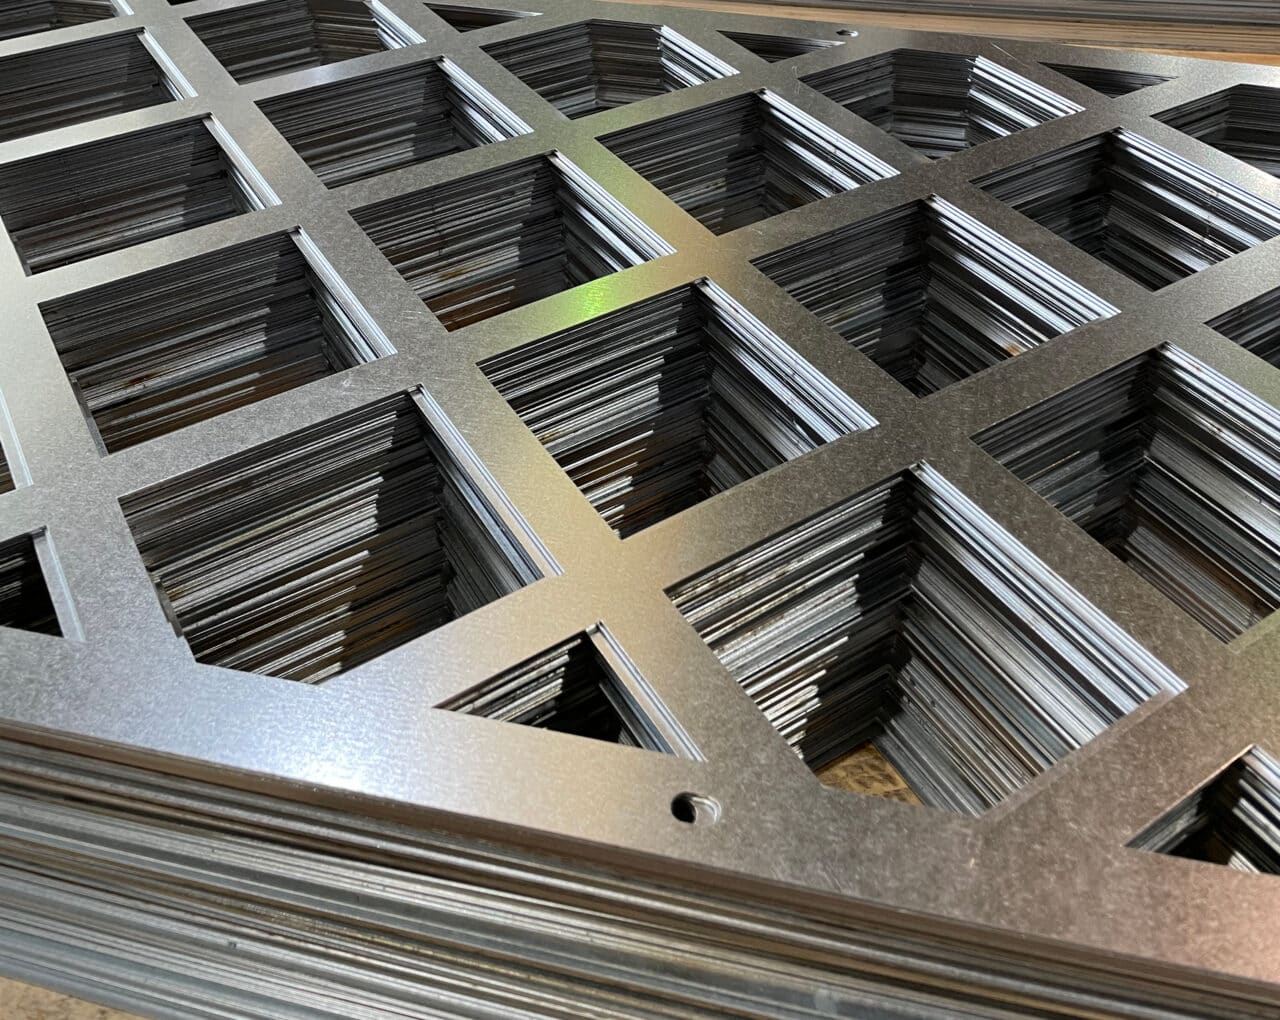 Metal Profiling 101: The Advantages of Laser Cutting - The Laser Cutting Co.